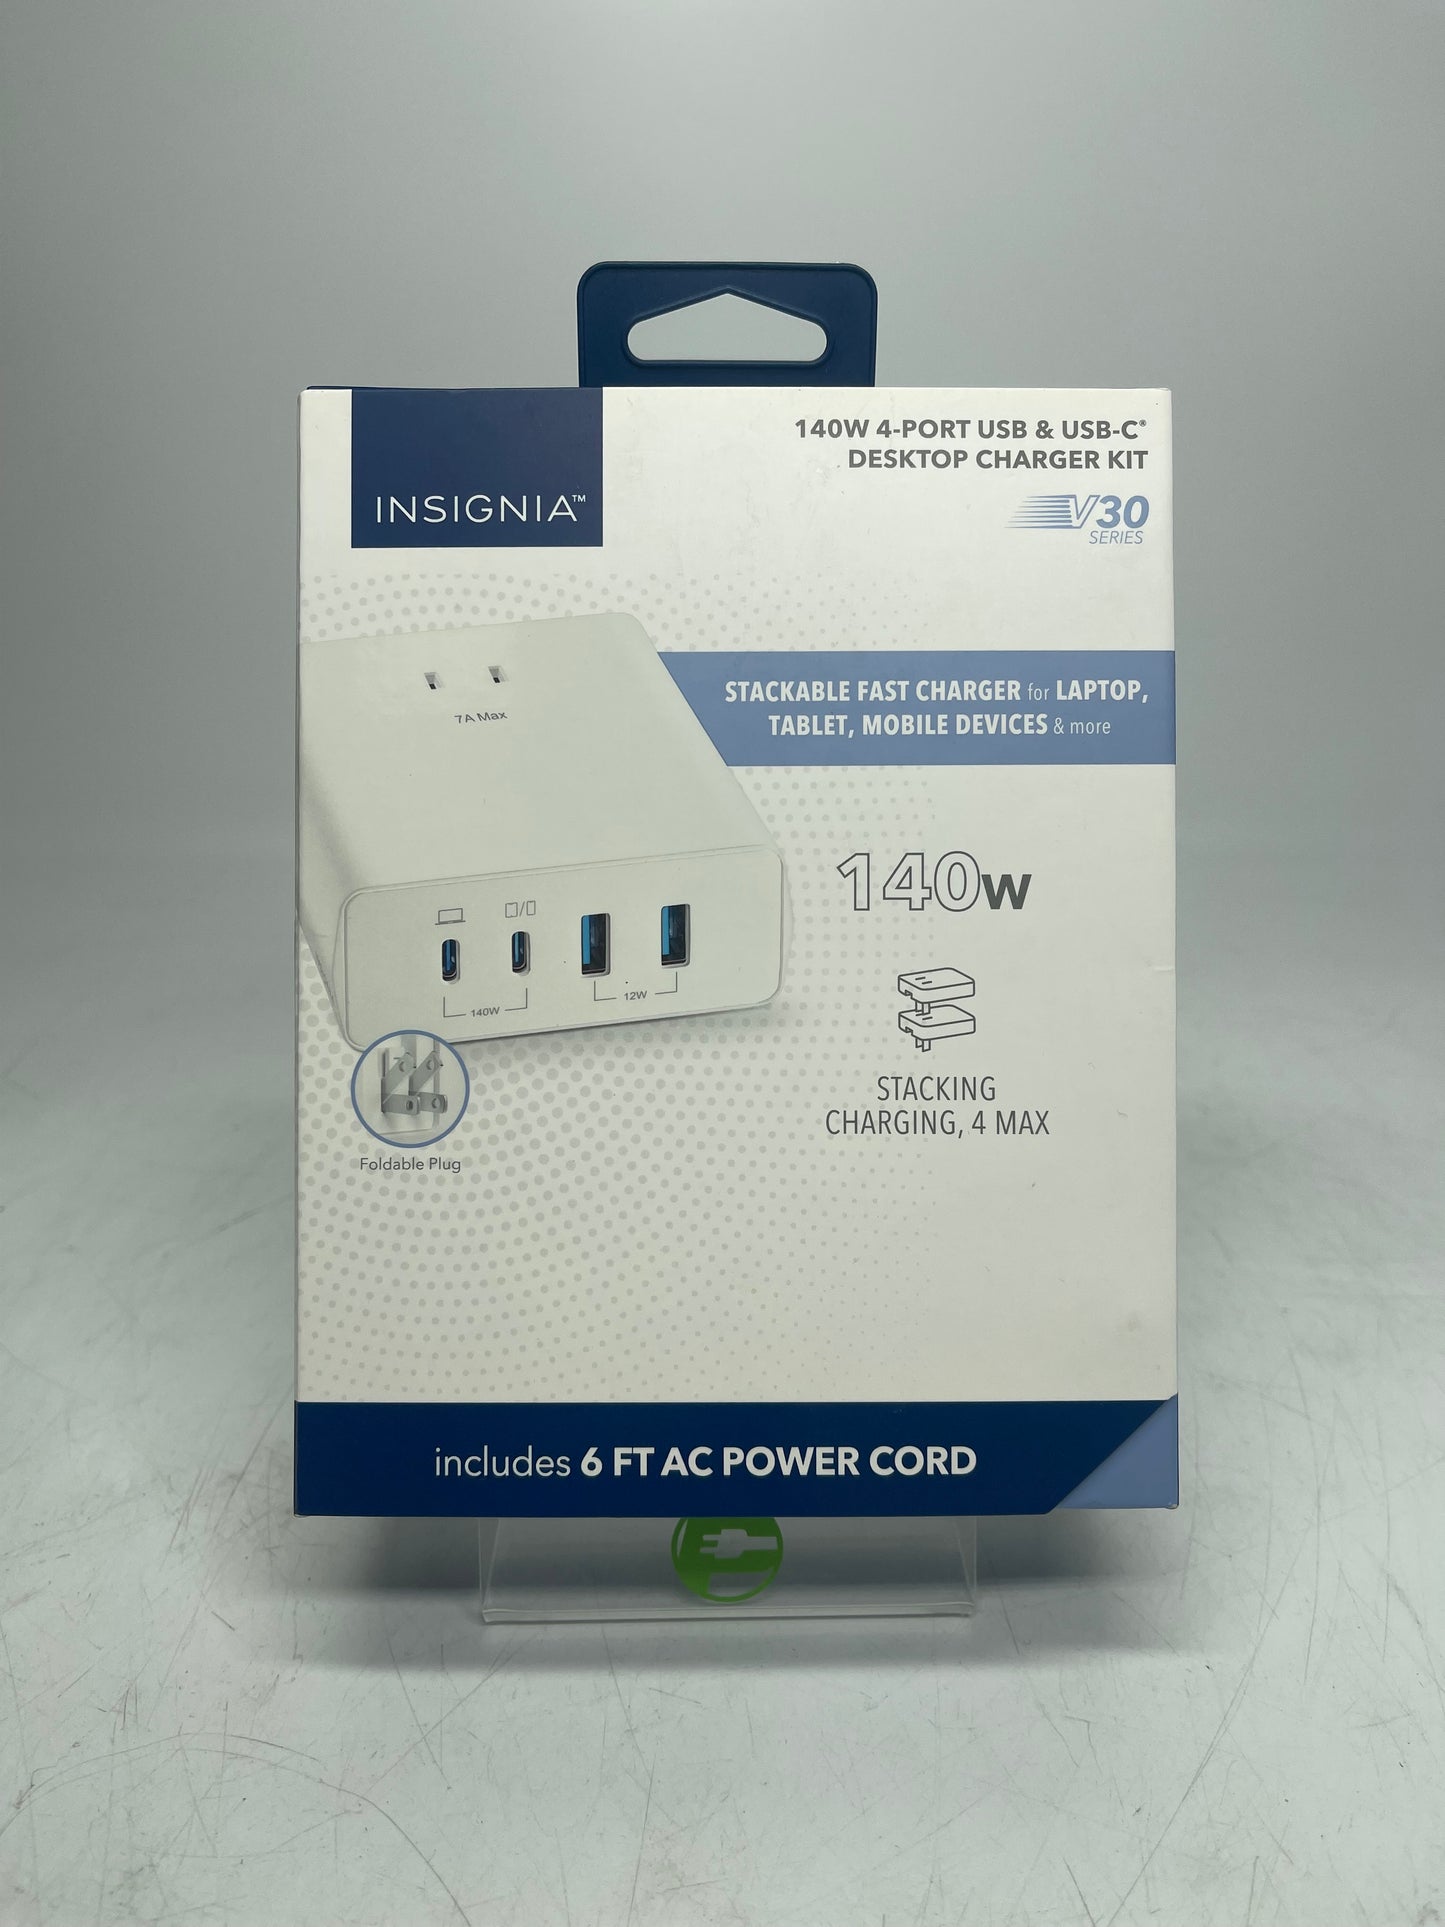 New Insignia 140W 4-Port USB and USB-C Desktop Charger Kit For MacBook Pro 16"